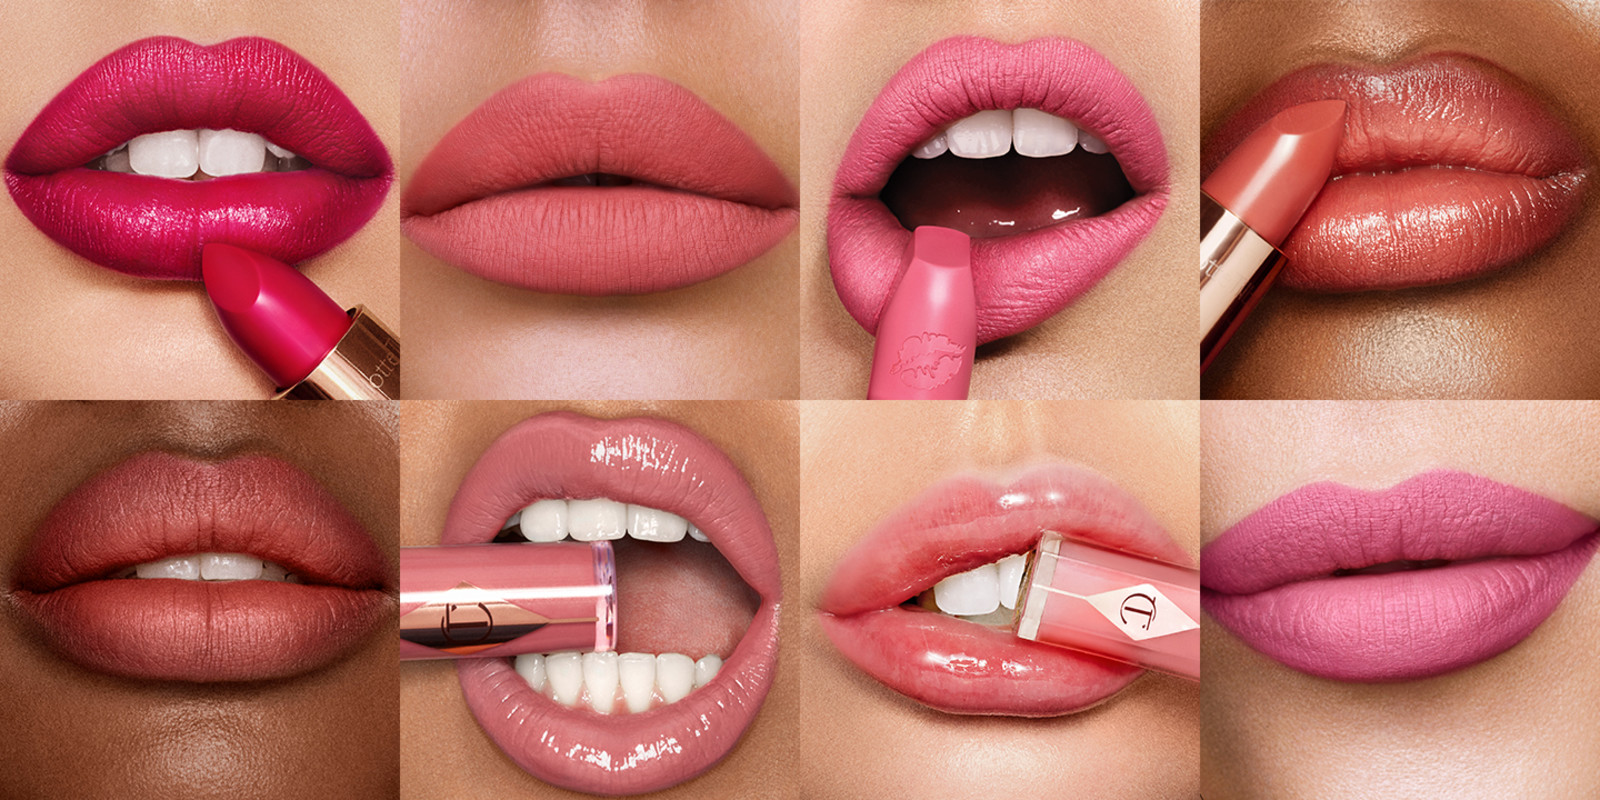 Collage of 8 models of different skin tones wearing different pink lipstick shades by Charlotte Tilbury.